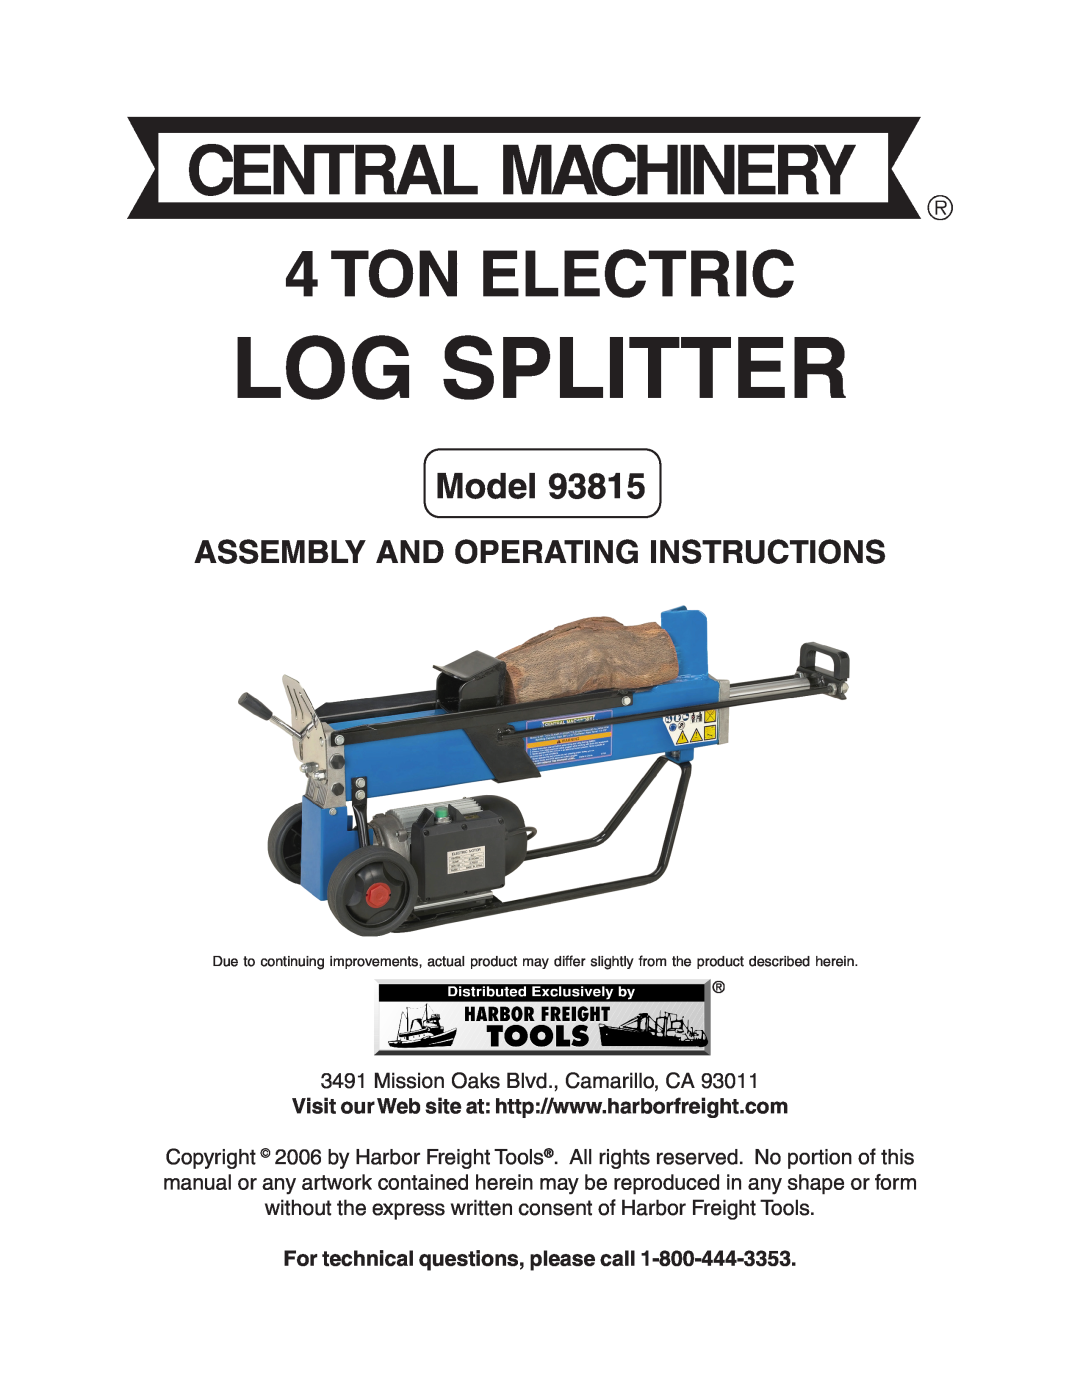 Harbor Freight Tools 93815 manual For technical questions, please call, Log Splitter, Ton Electric, Model 